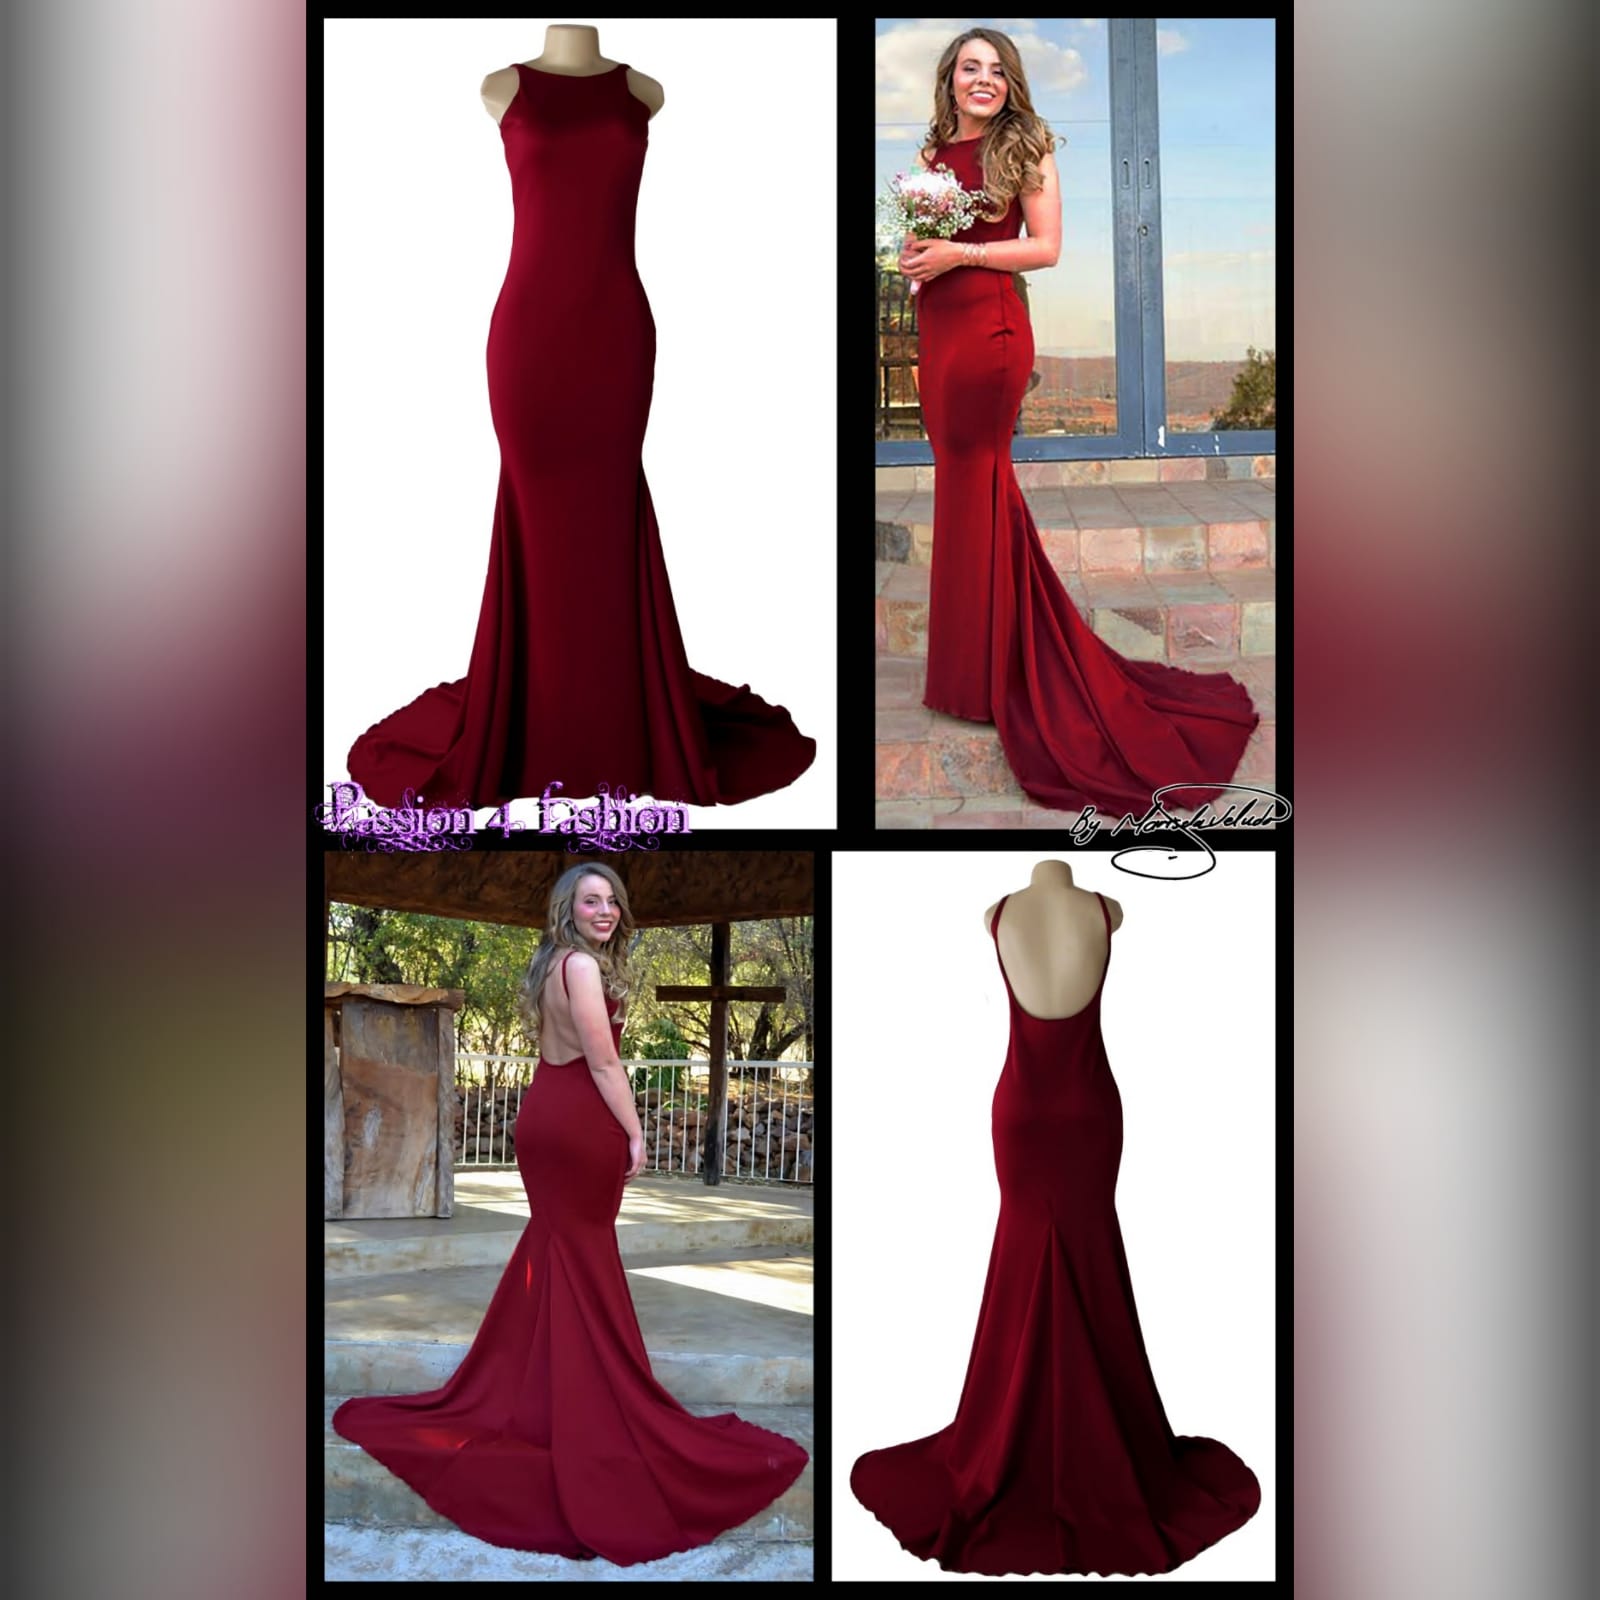 Maroon simple soft mermaid prom dress 6 maroon simple soft mermaid prom dress with a jewel neckline and a low rounded open back, thin shoulder straps and a train.